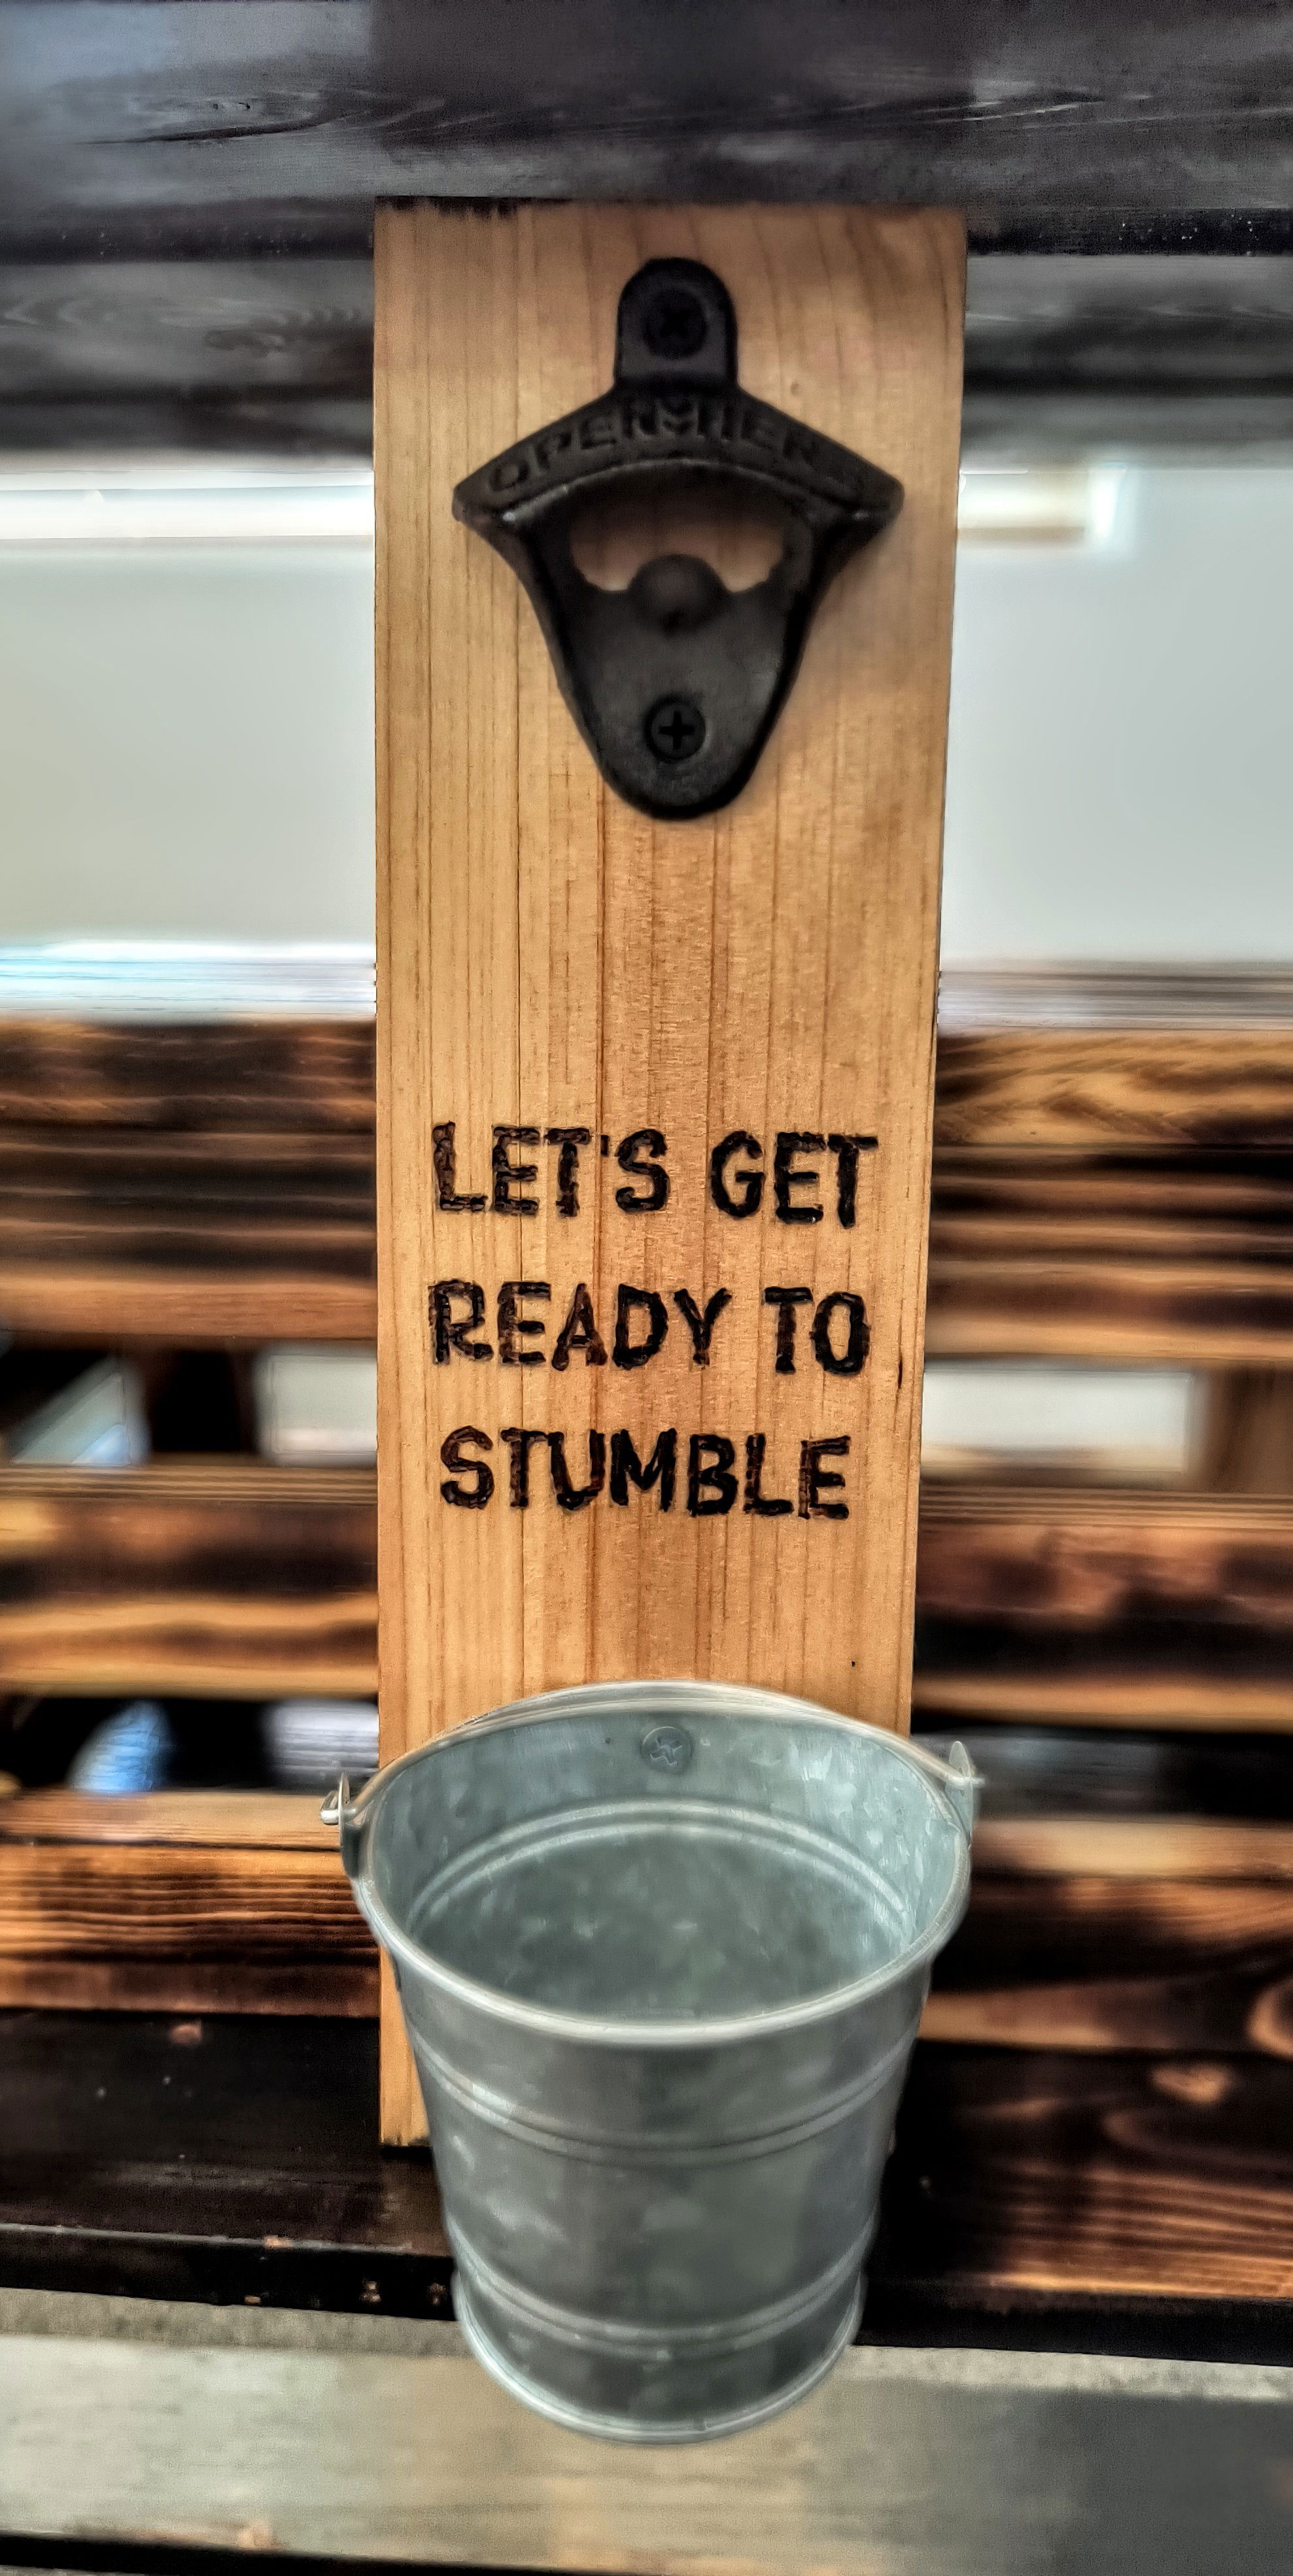 Let's Get Ready To Stumble ($25)